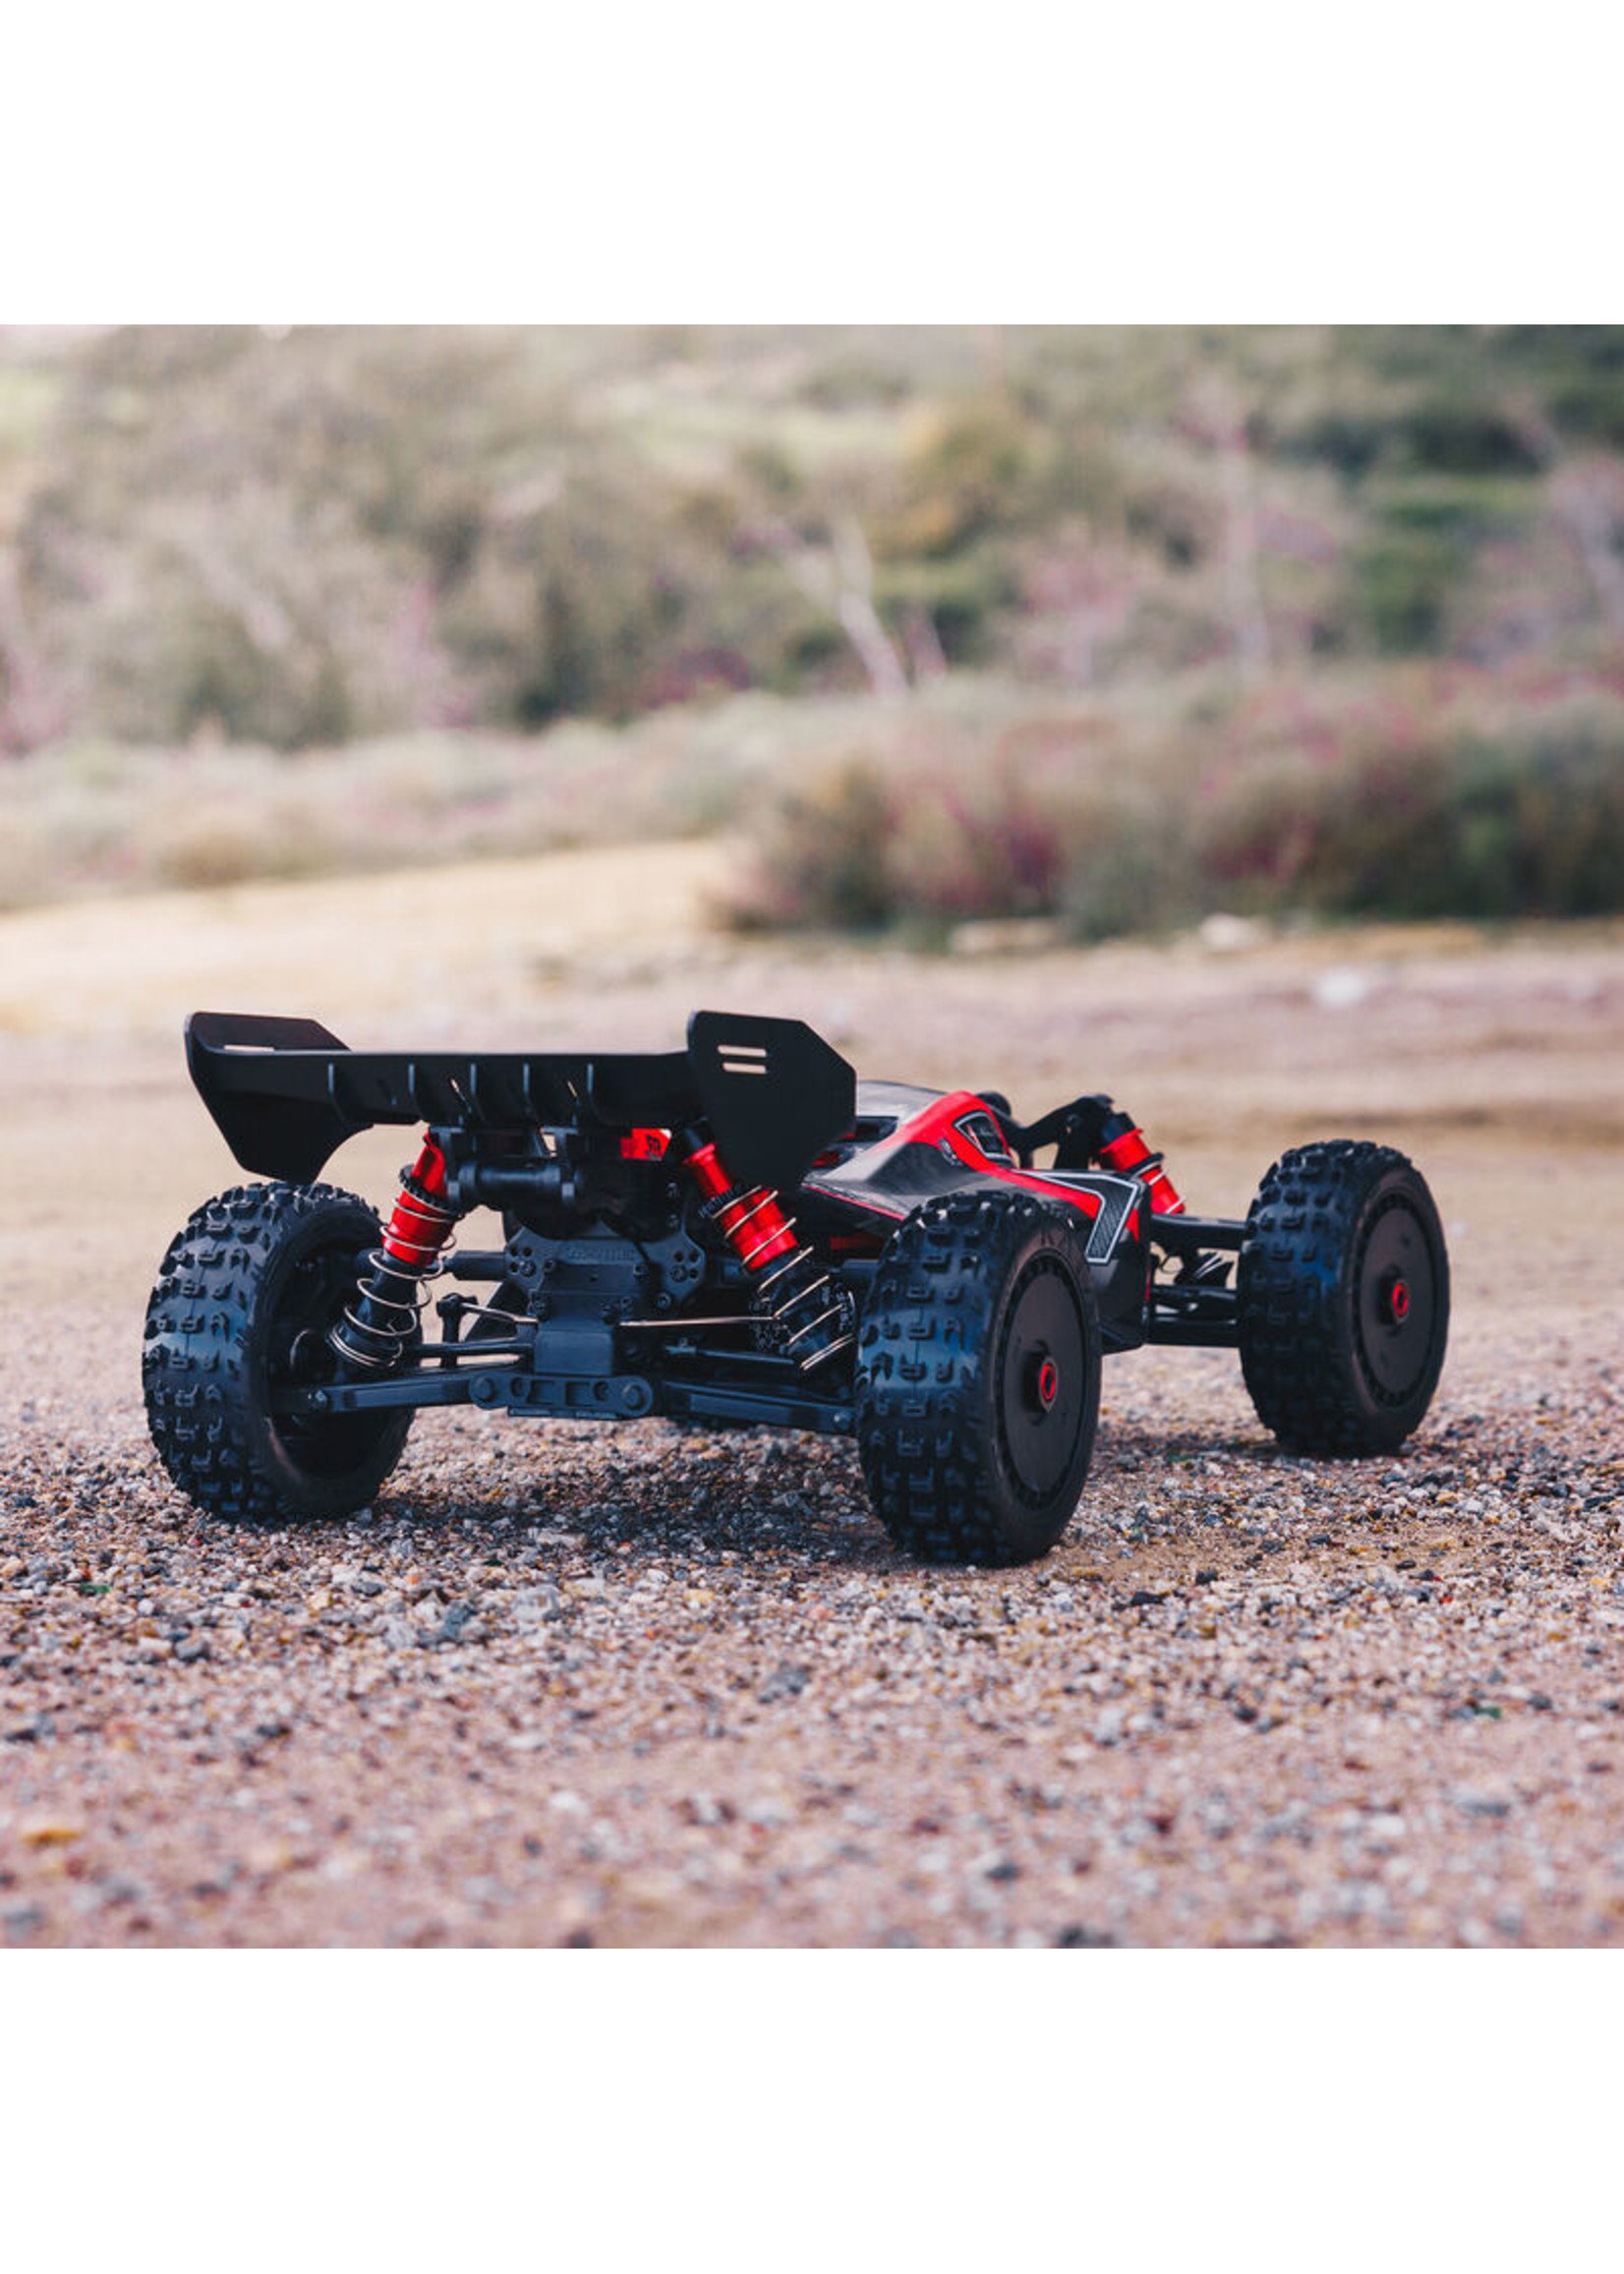 Arrma 1/8 TYPHON 6S BLX 4WD Brushless Buggy with Spektrum RTR - Red/Grey V5